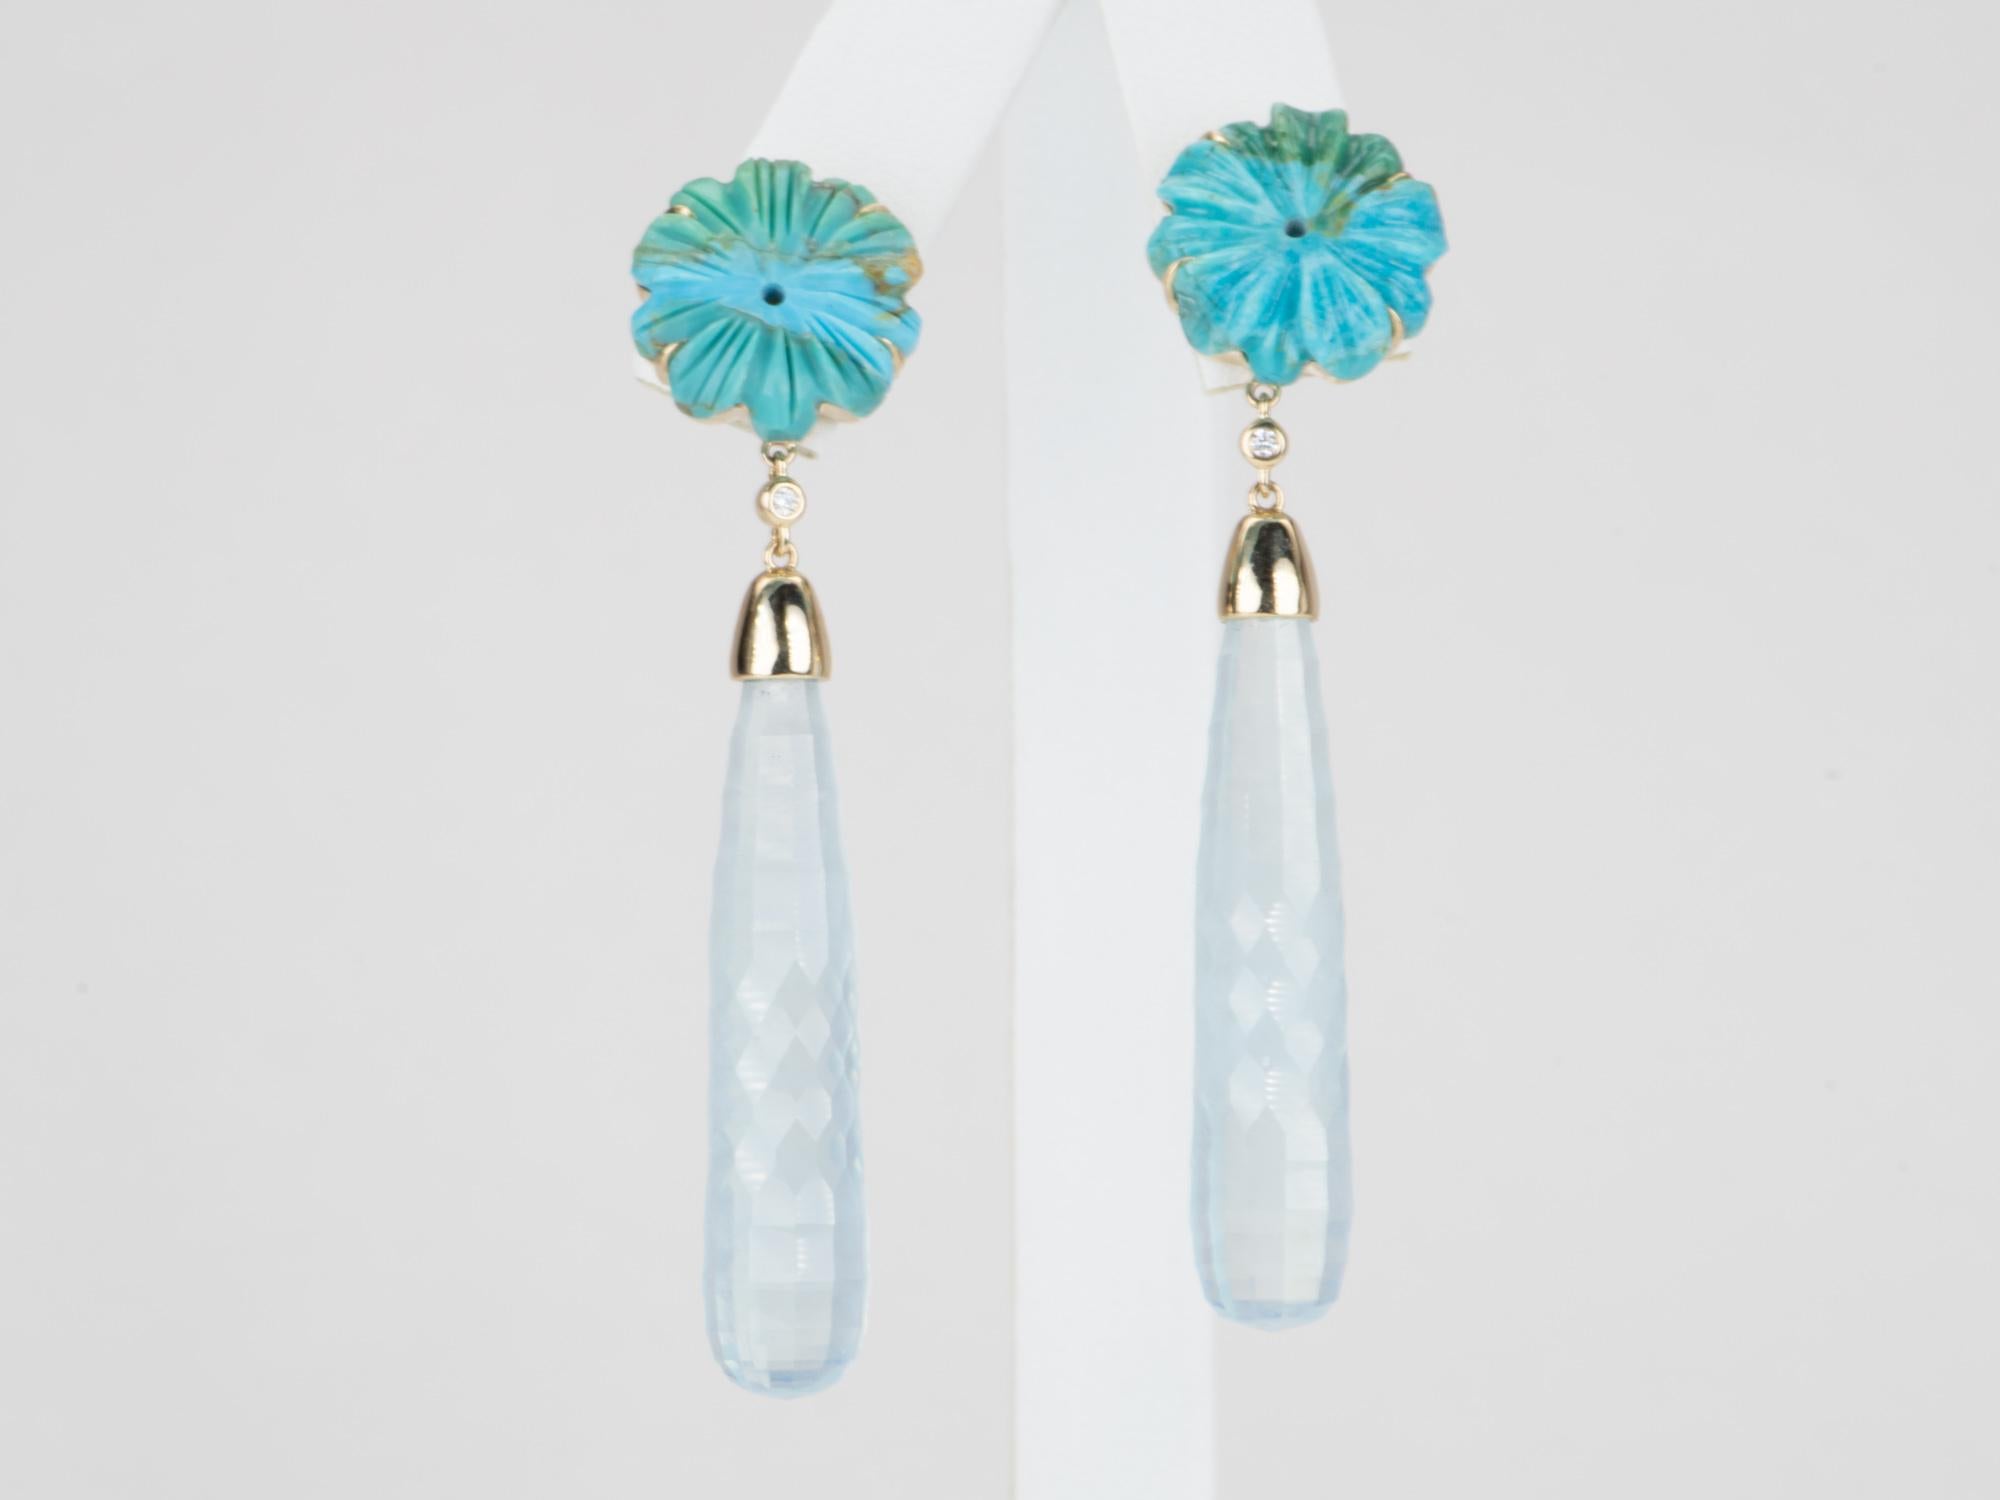 Make a statement with these long aquamarine and turquoise earrings! An awe-inspiring sight to behold, it's like nature herself inspired their unique carving pattern. Perfect for any occasion, these long beauties are set in 14k gold to highlight